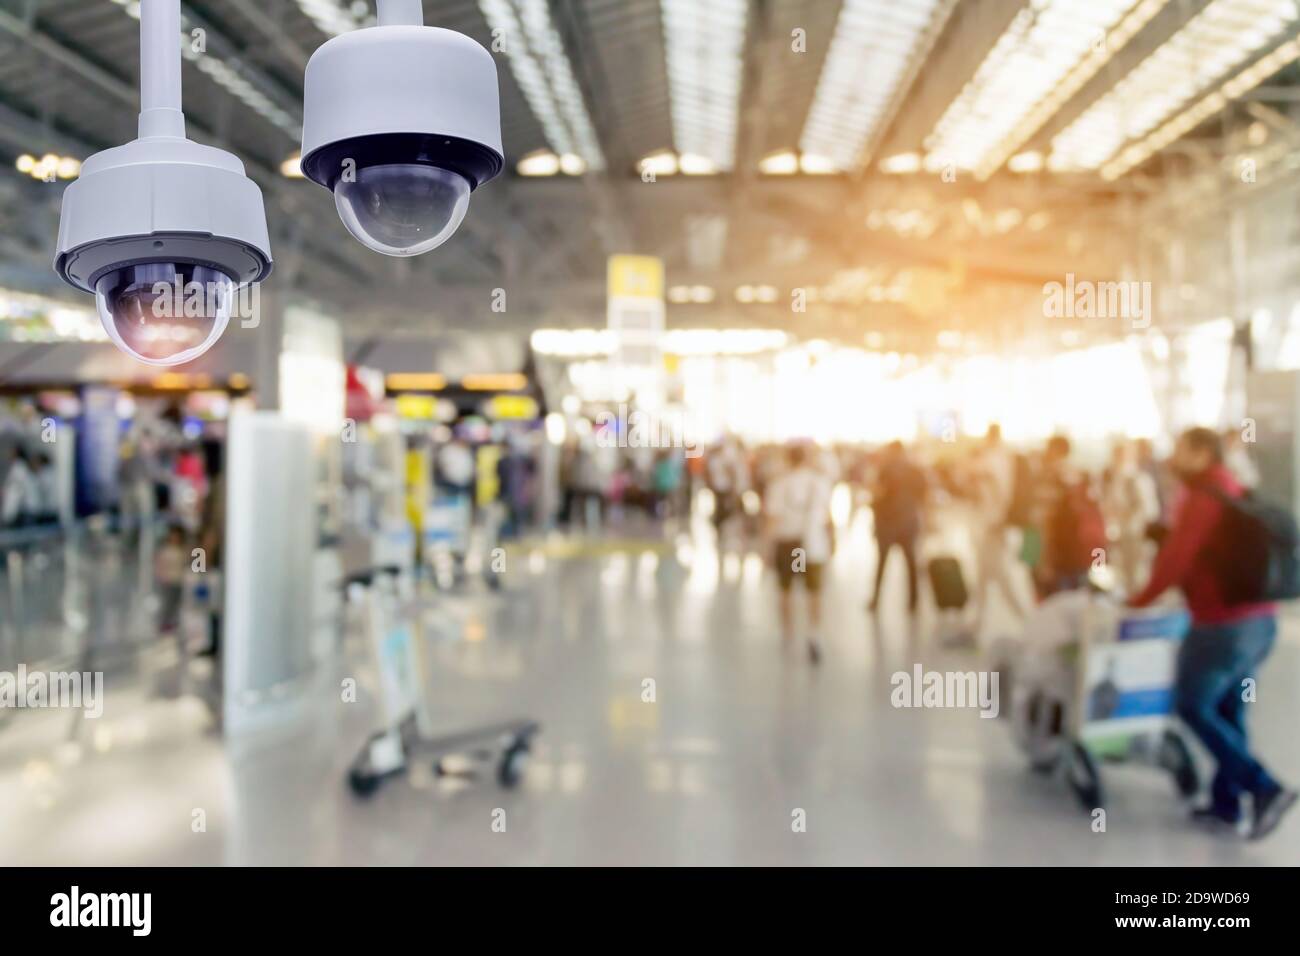 Closeup CCTV security camera on blurred inside the airport terminal background. Stock Photo